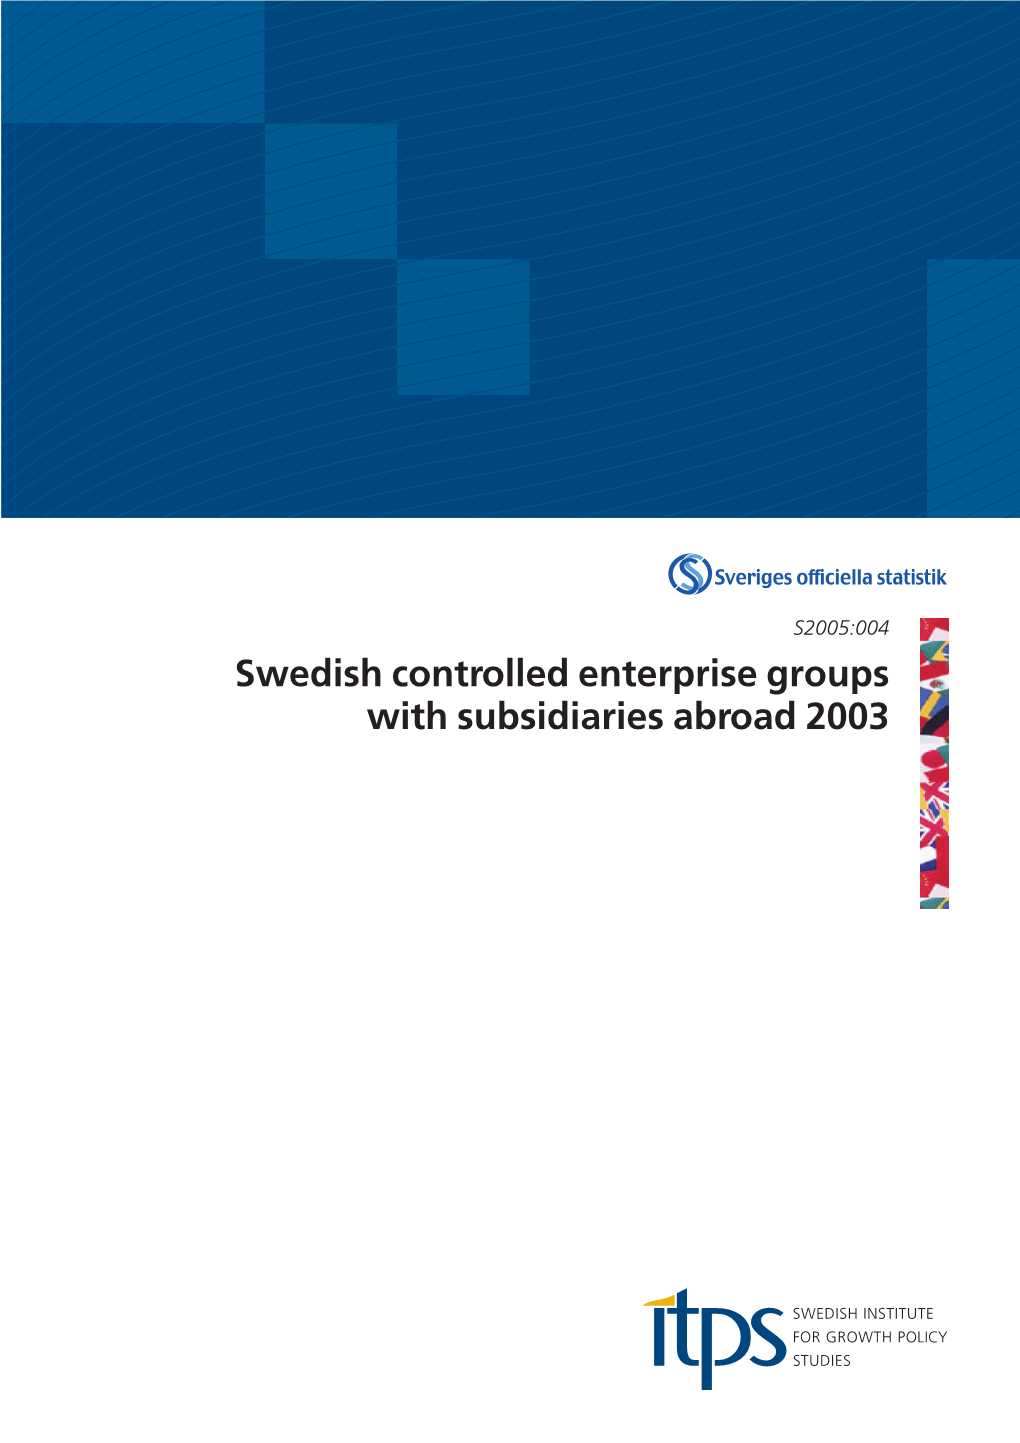 Swedish Controlled Enterprise Groups with Subsidiaries Abroad 2003